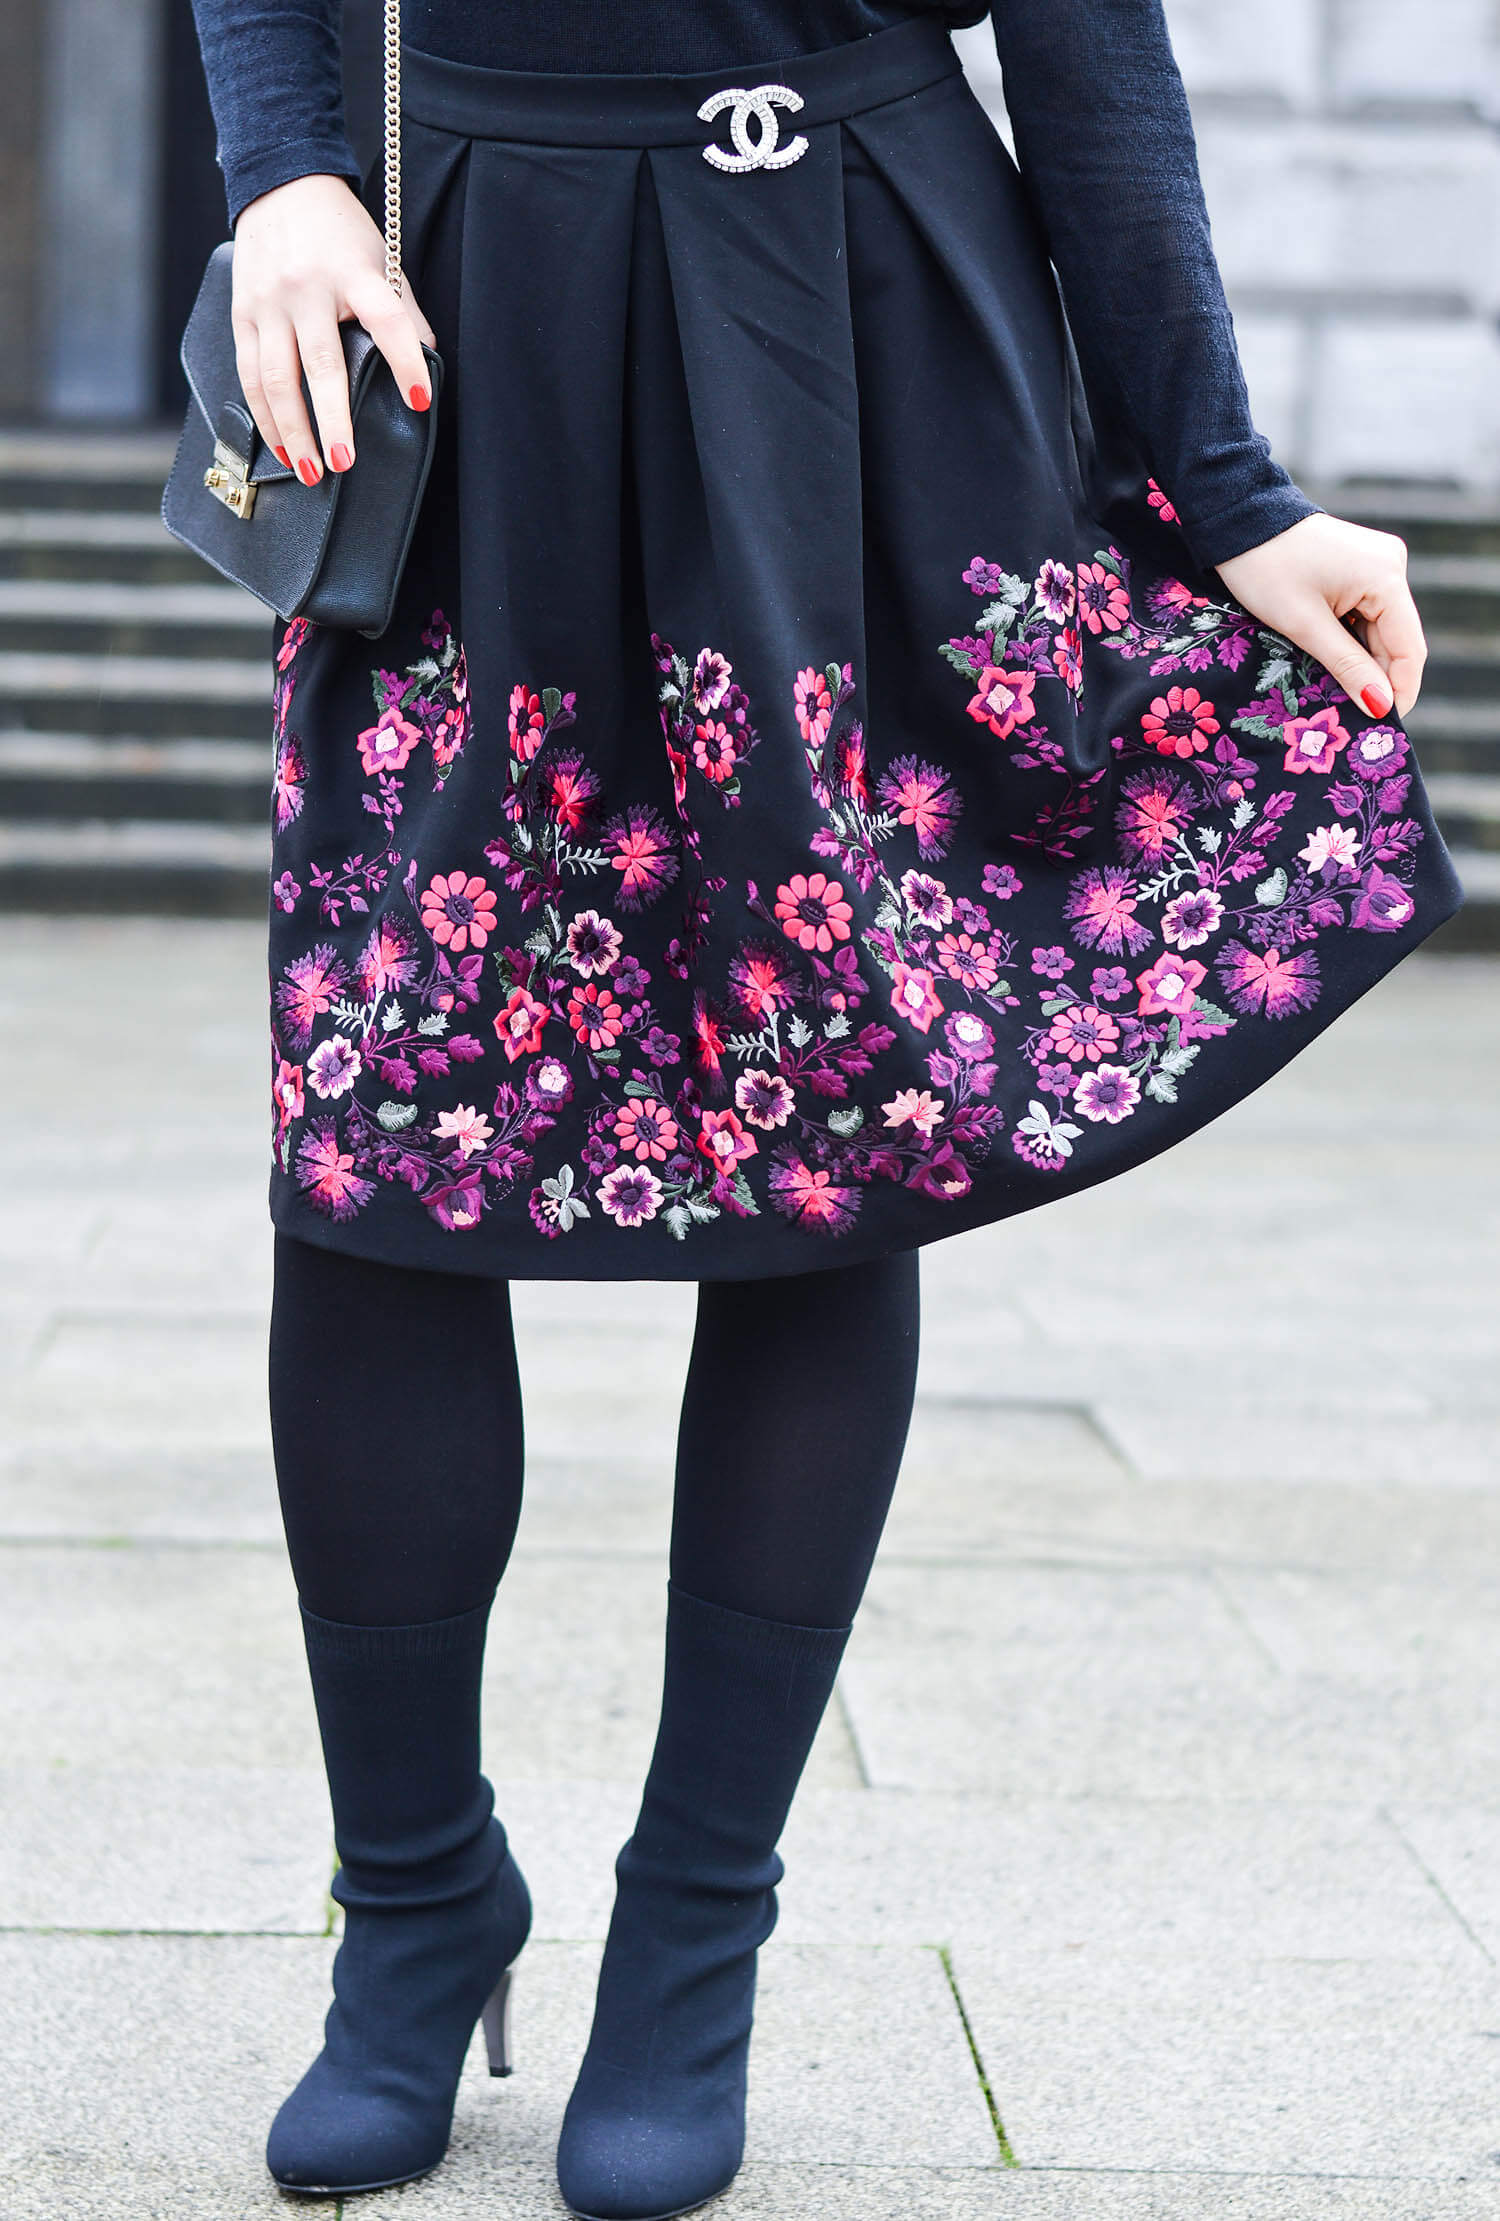 Kationette-fashionblogger-nrw-Merry-Christmas-Outfit-New-Hallhuber-Skirt-with-Flower-Embroidery